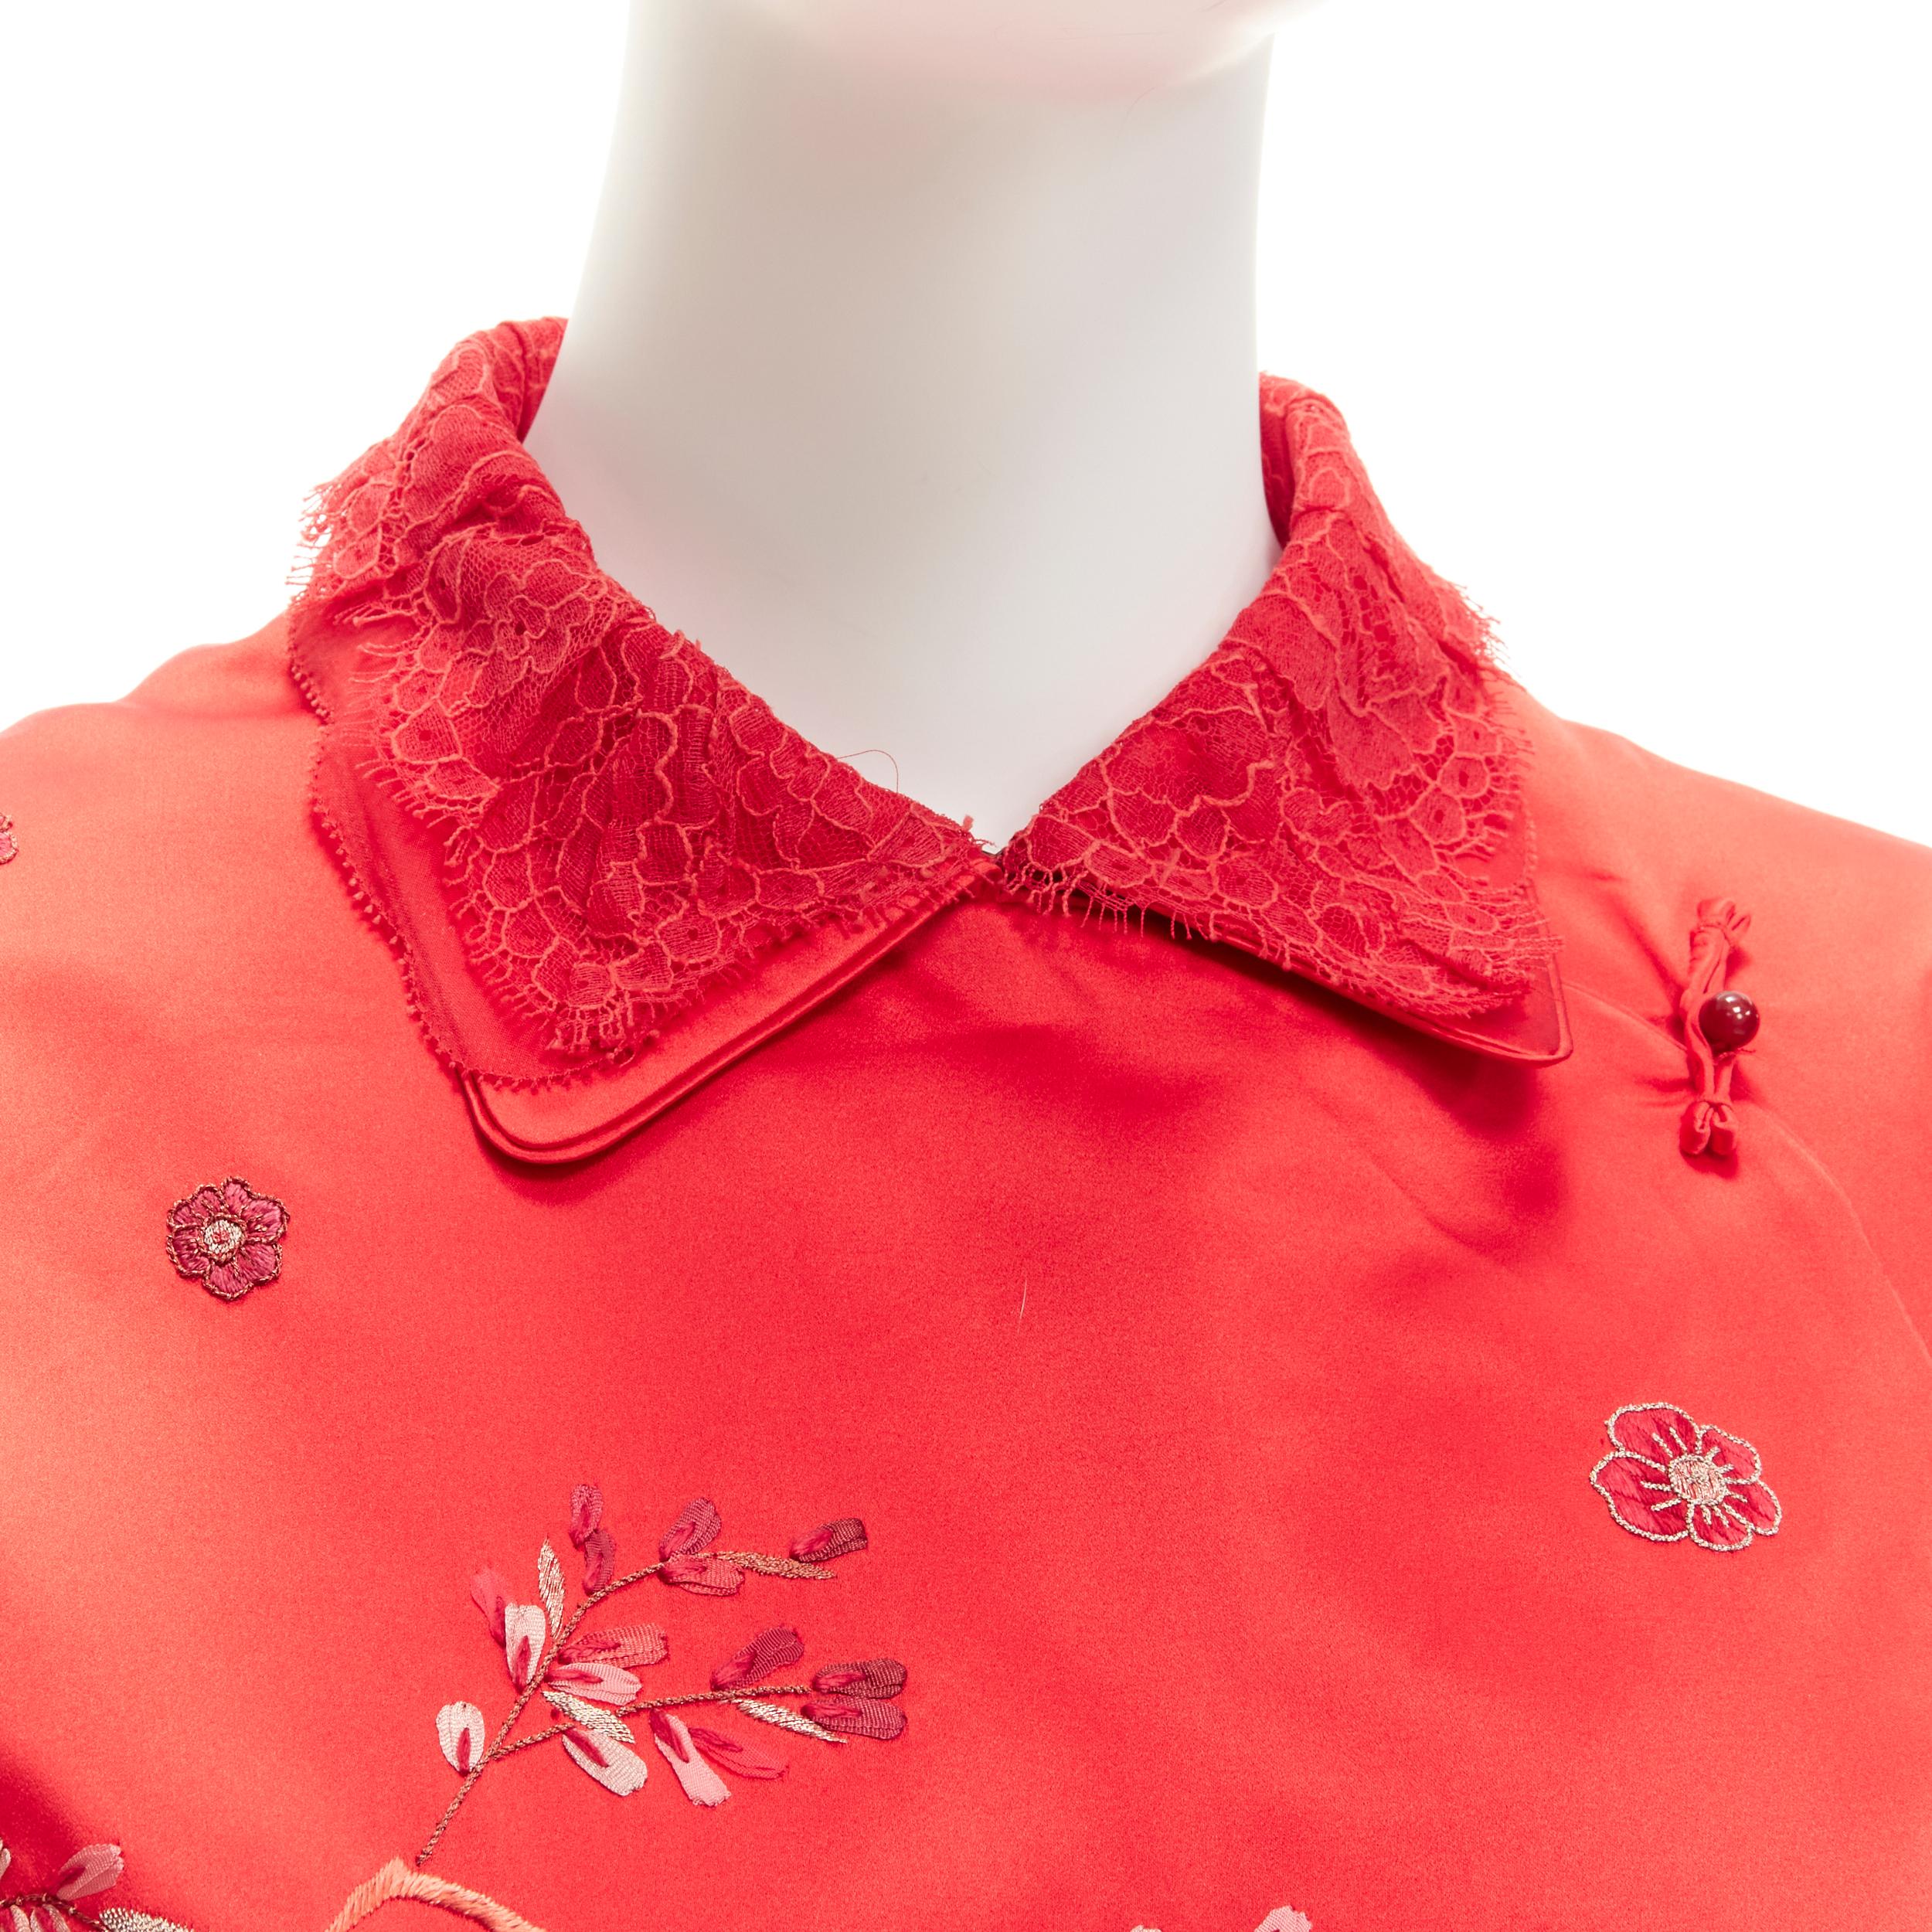 SHIATZY CHEN red silk lace collar floral cloud embroidery qipao top IT44 L
Reference: TGAS/D00071
Brand: Shiatzy Chen
Material: Silk
Color: Red
Pattern: Ethnic
Closure: Snap Buttons
Lining: Red Silk
Extra Details: Snap button and qipao button